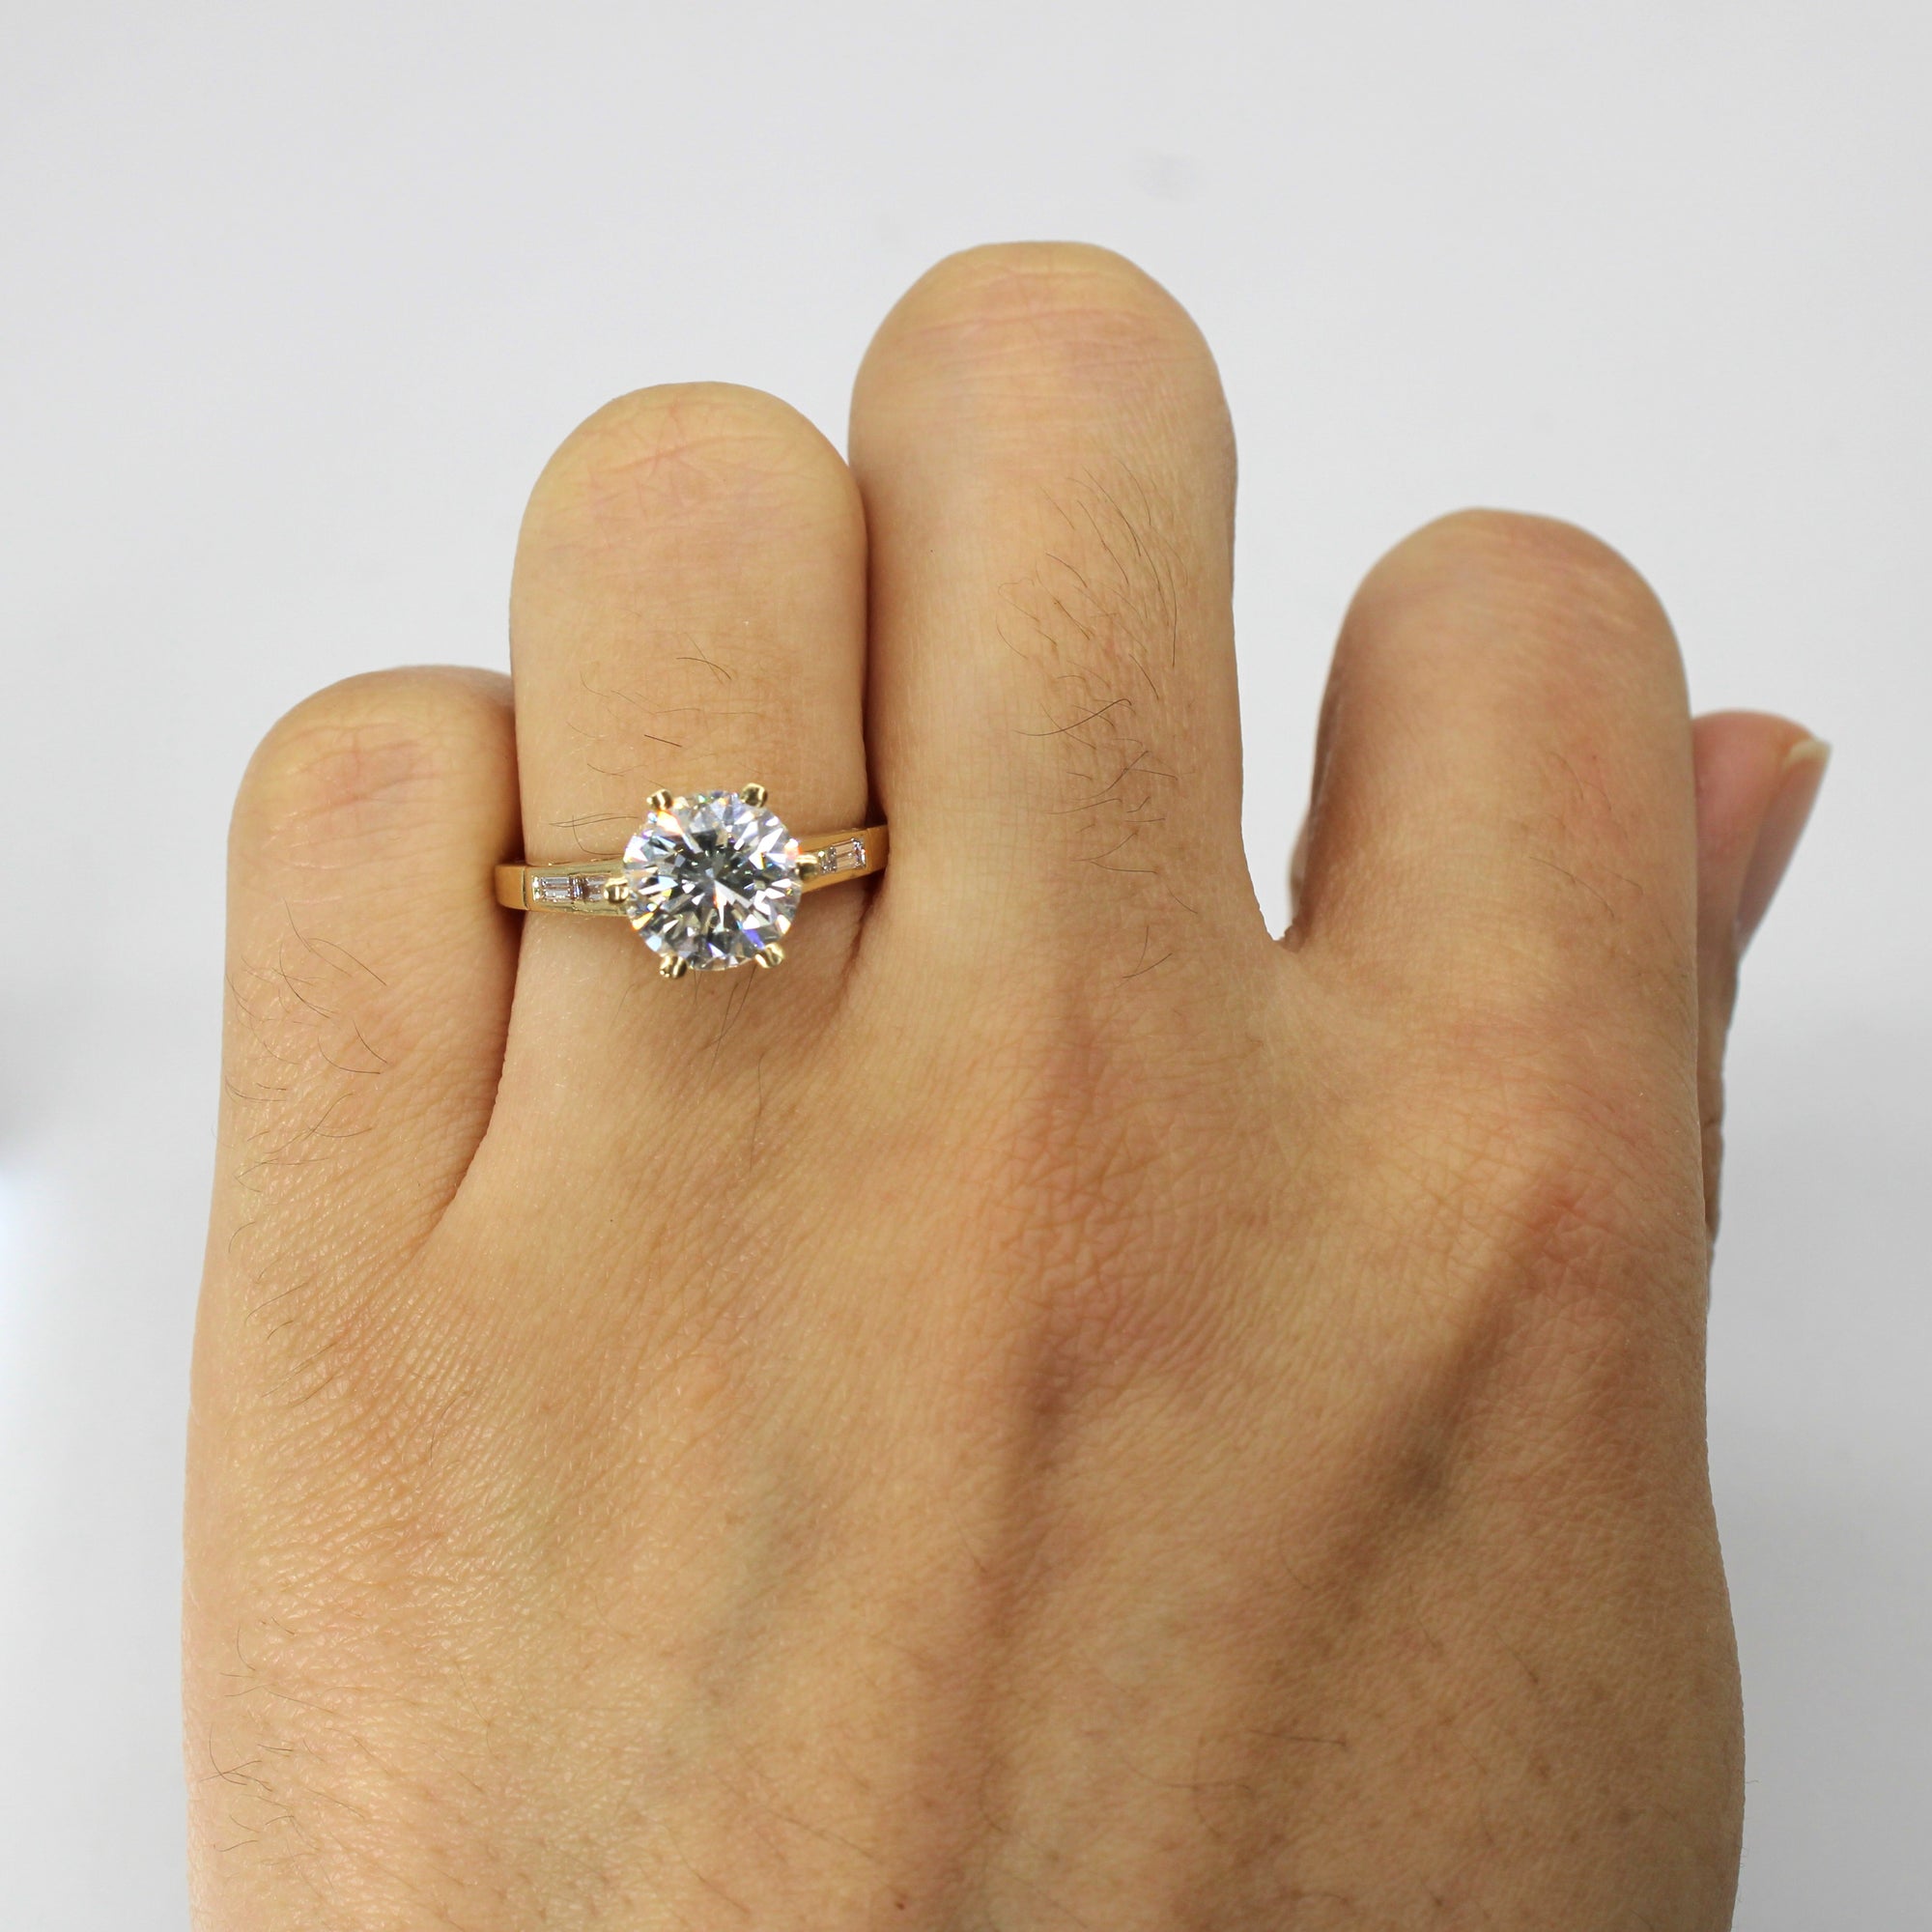 Solitaire with Accents Diamond Engagement Ring | 1.99ctw | SZ 5.75 |